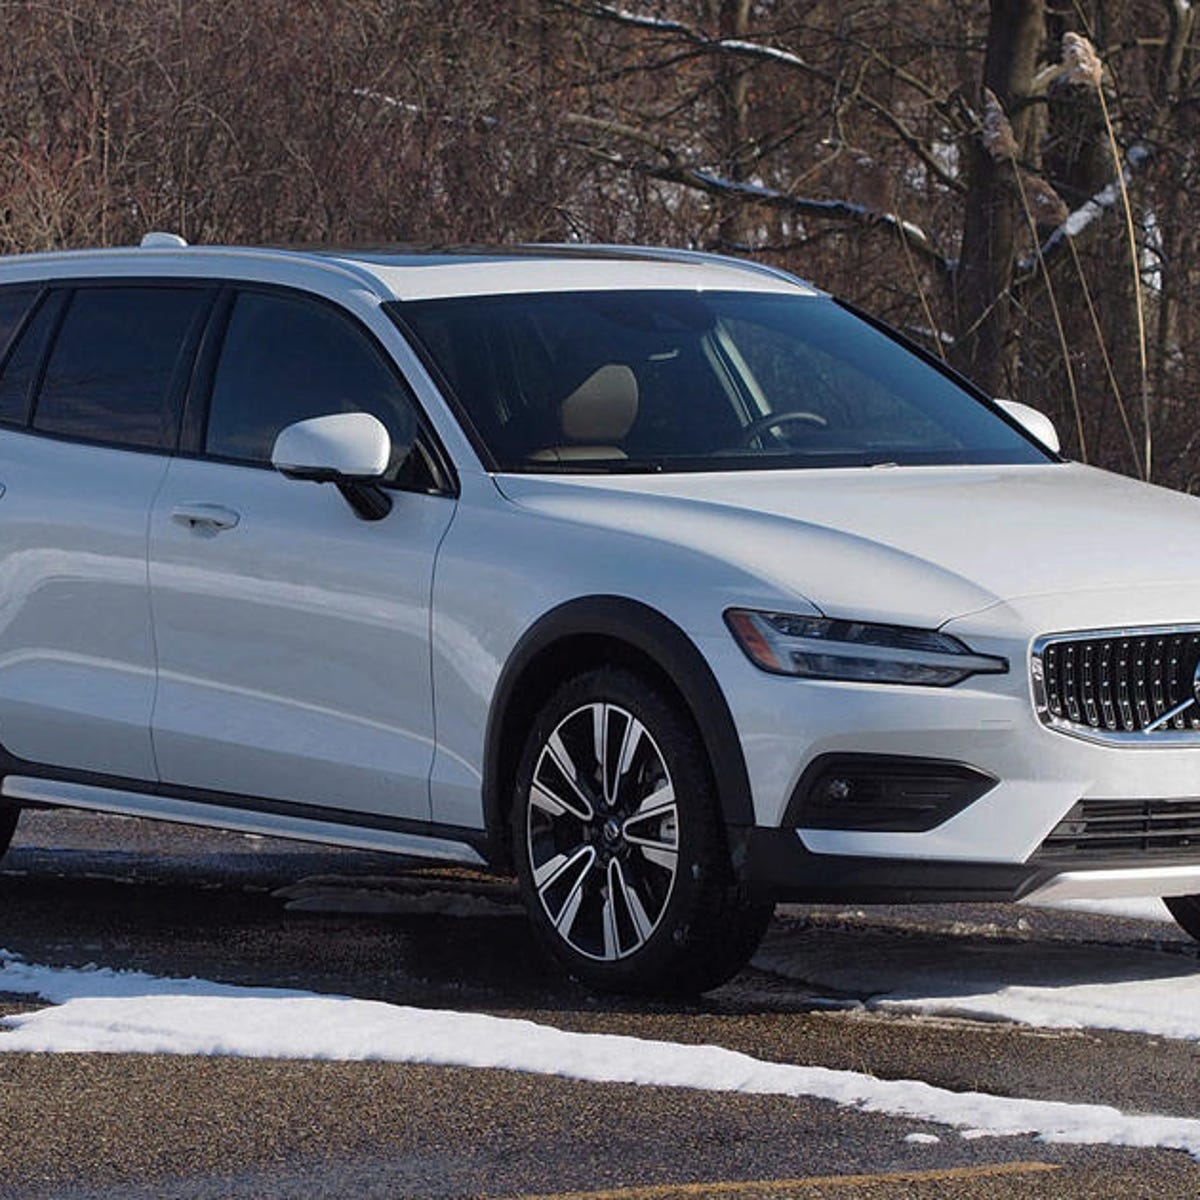 2021 Volvo V60 Cross Country review: Chef's kiss - CNET